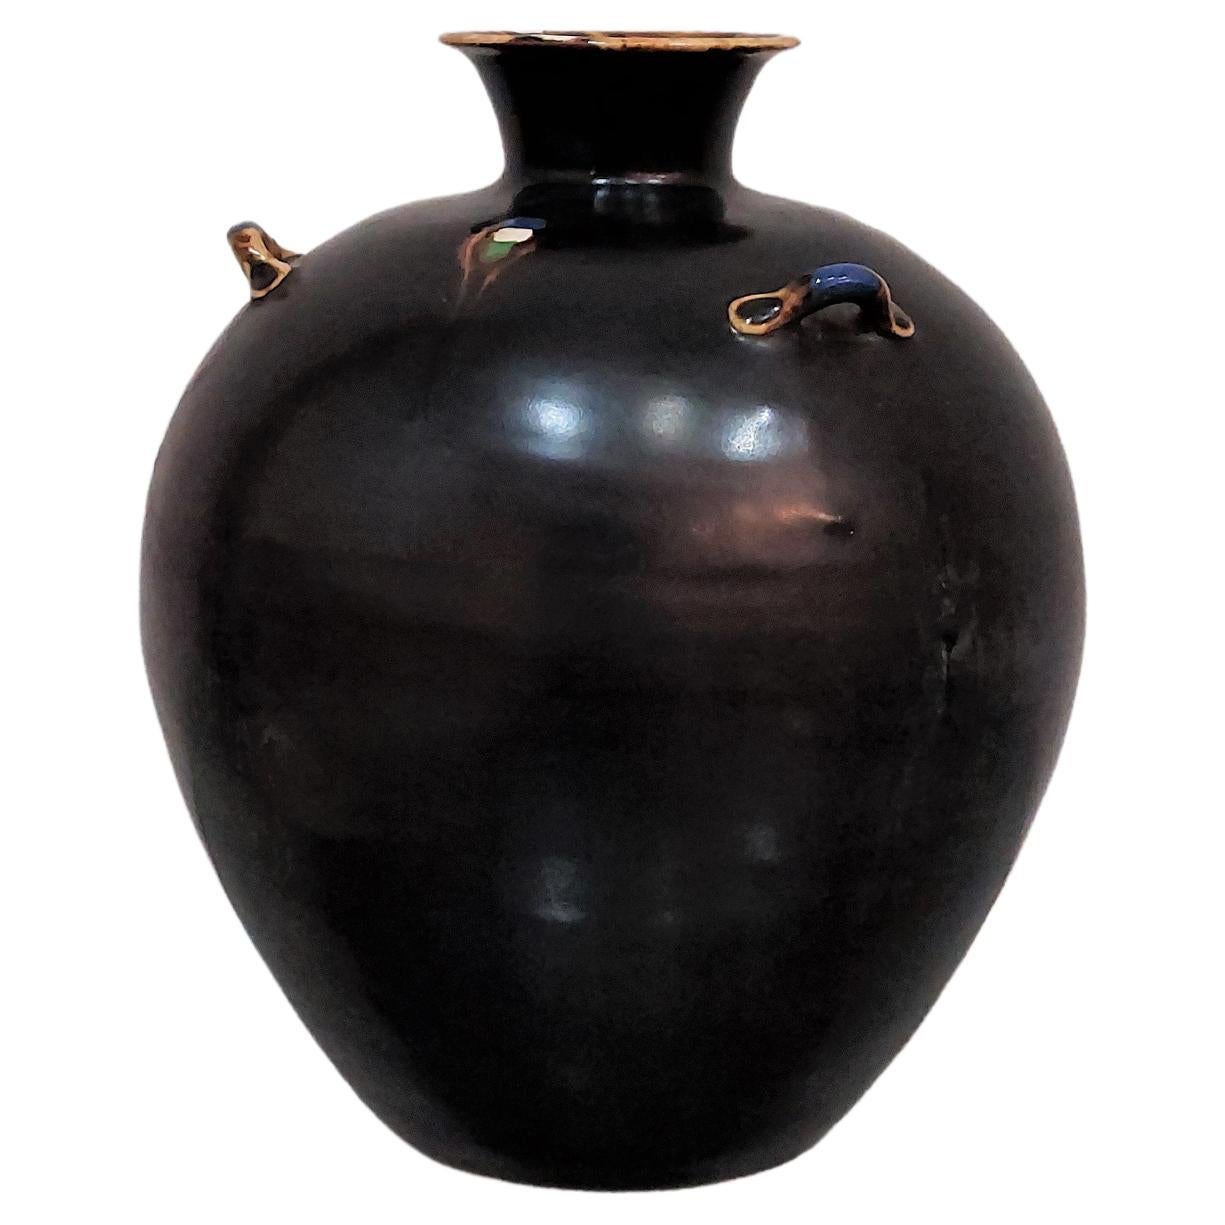 Vase in black enameled ceramic by an unknown designer with three small semicircular handles in polychrome glaze. It has a spherical body and a small neck with a flat edge where inside it is decorated entirely with polychrome enamel. Made in Italy in